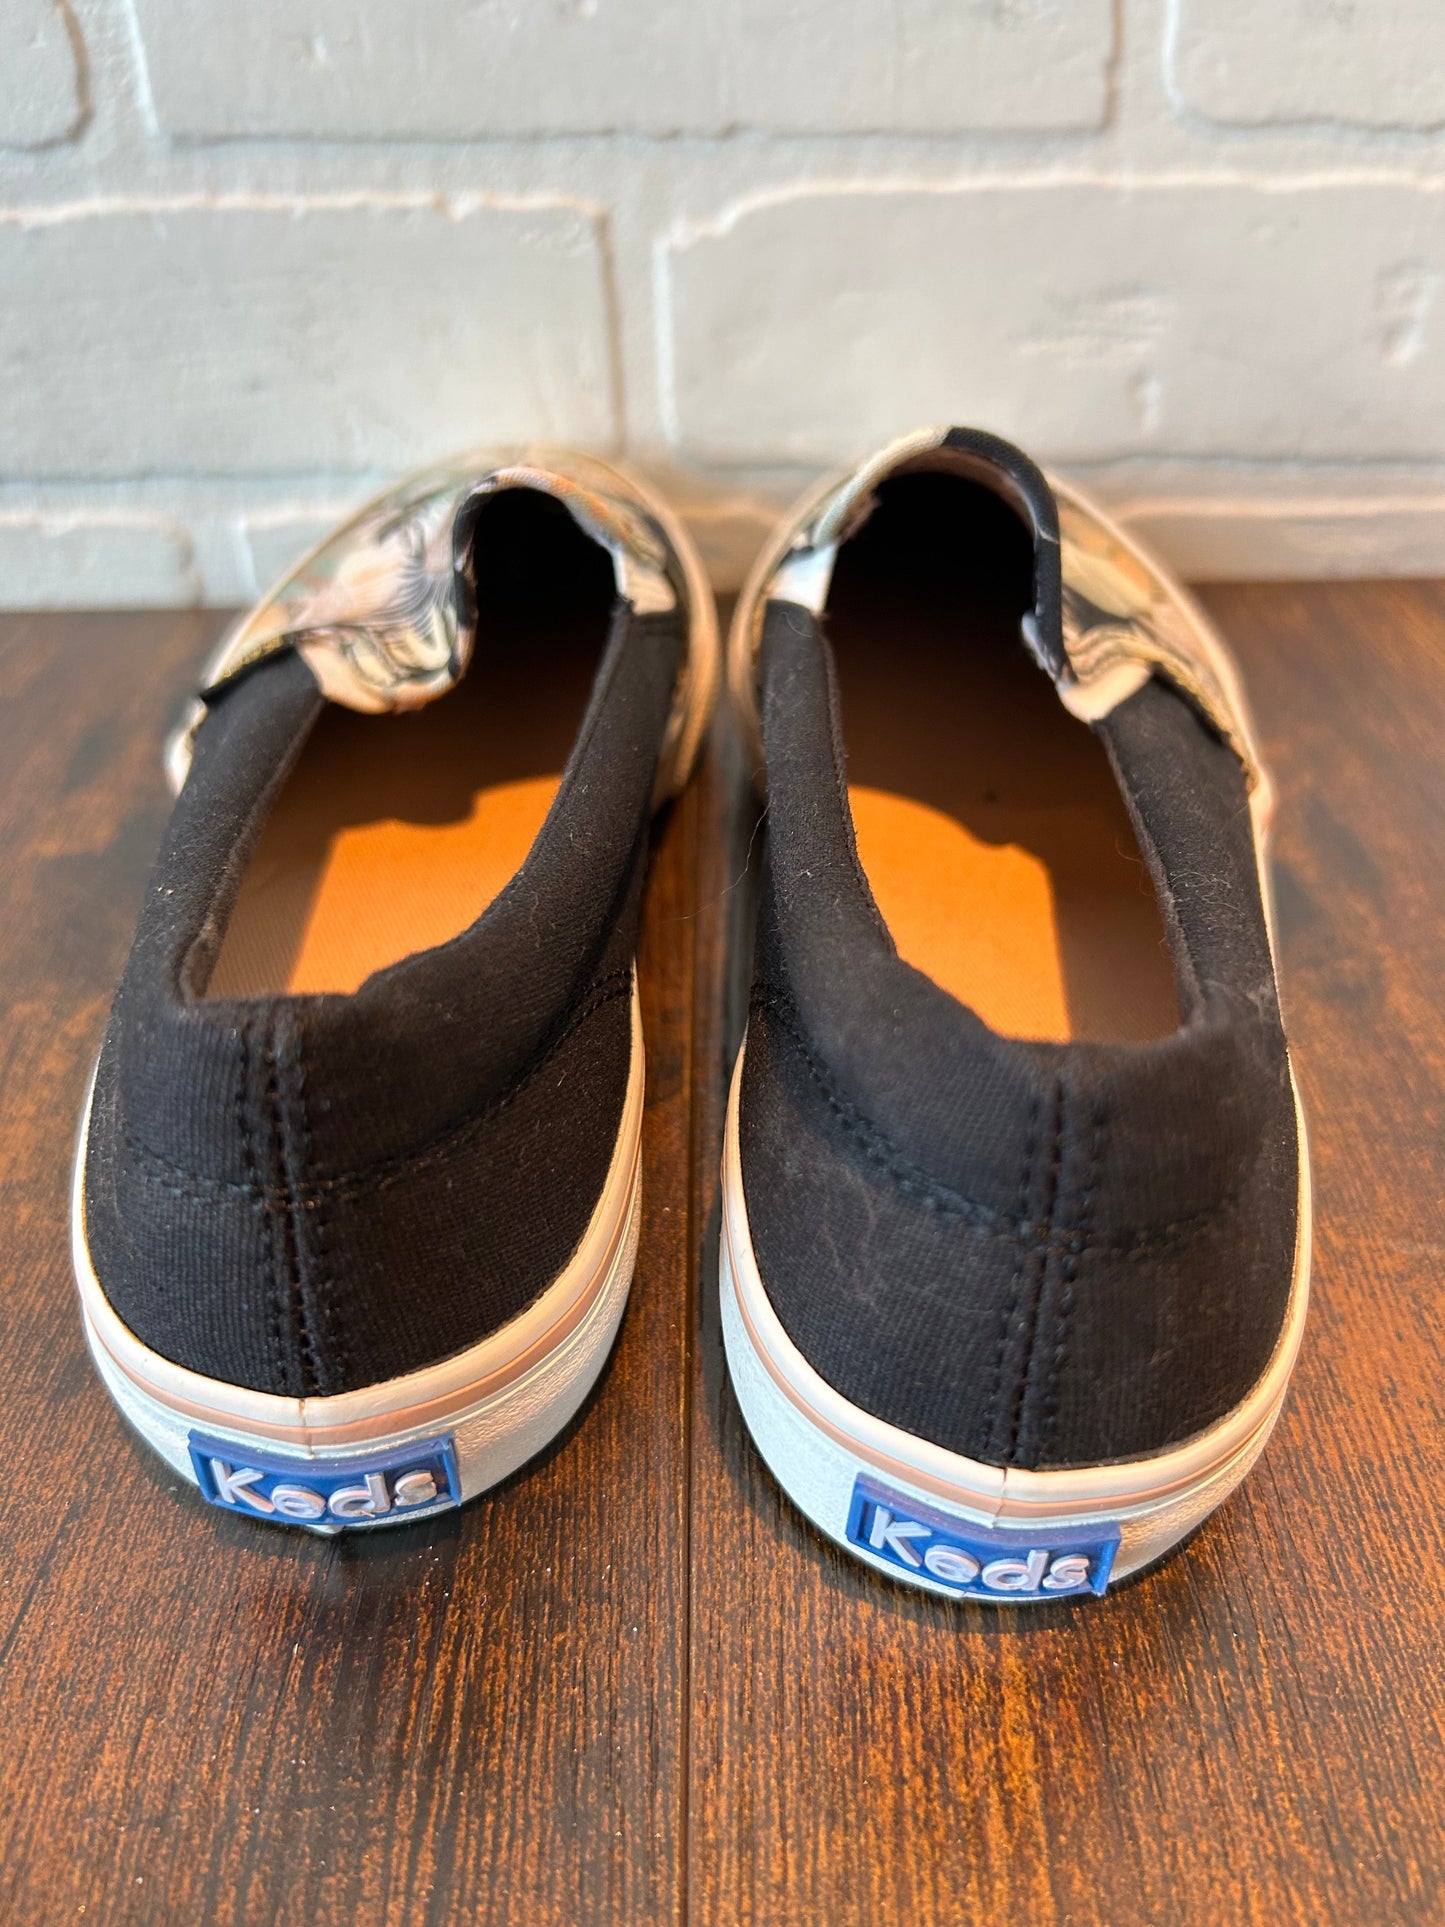 Black Shoes Sneakers Keds, Size 7